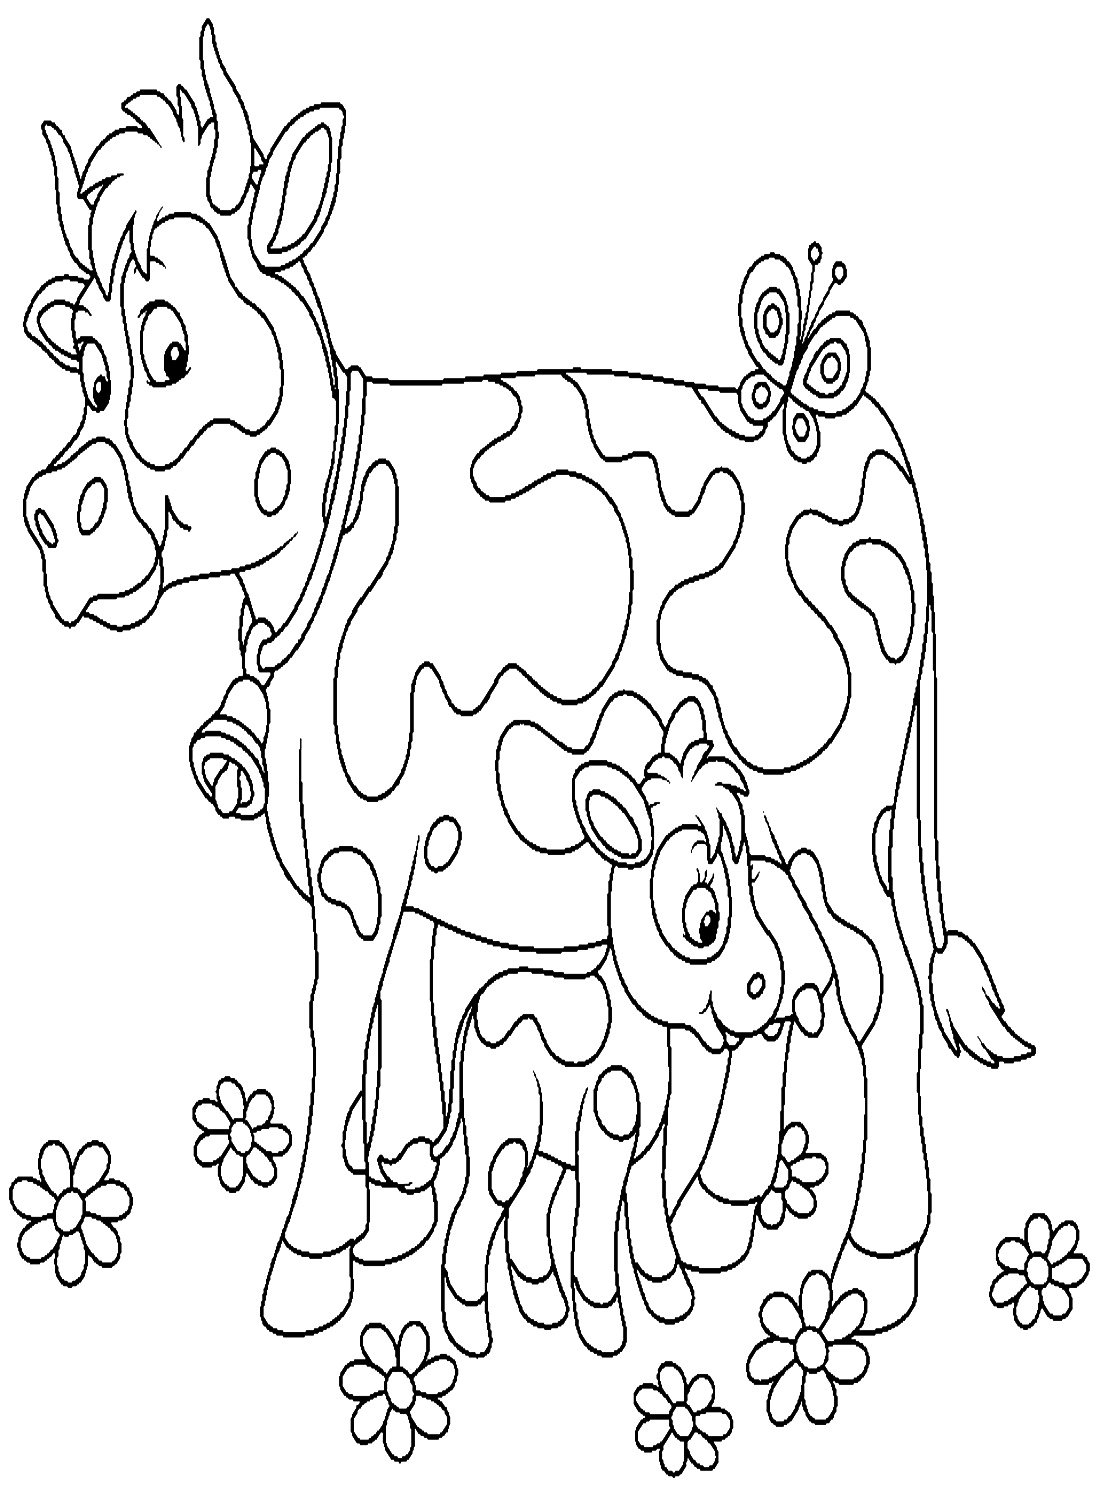 Cow And Calf Coloring Page - Free Printable Coloring Pages